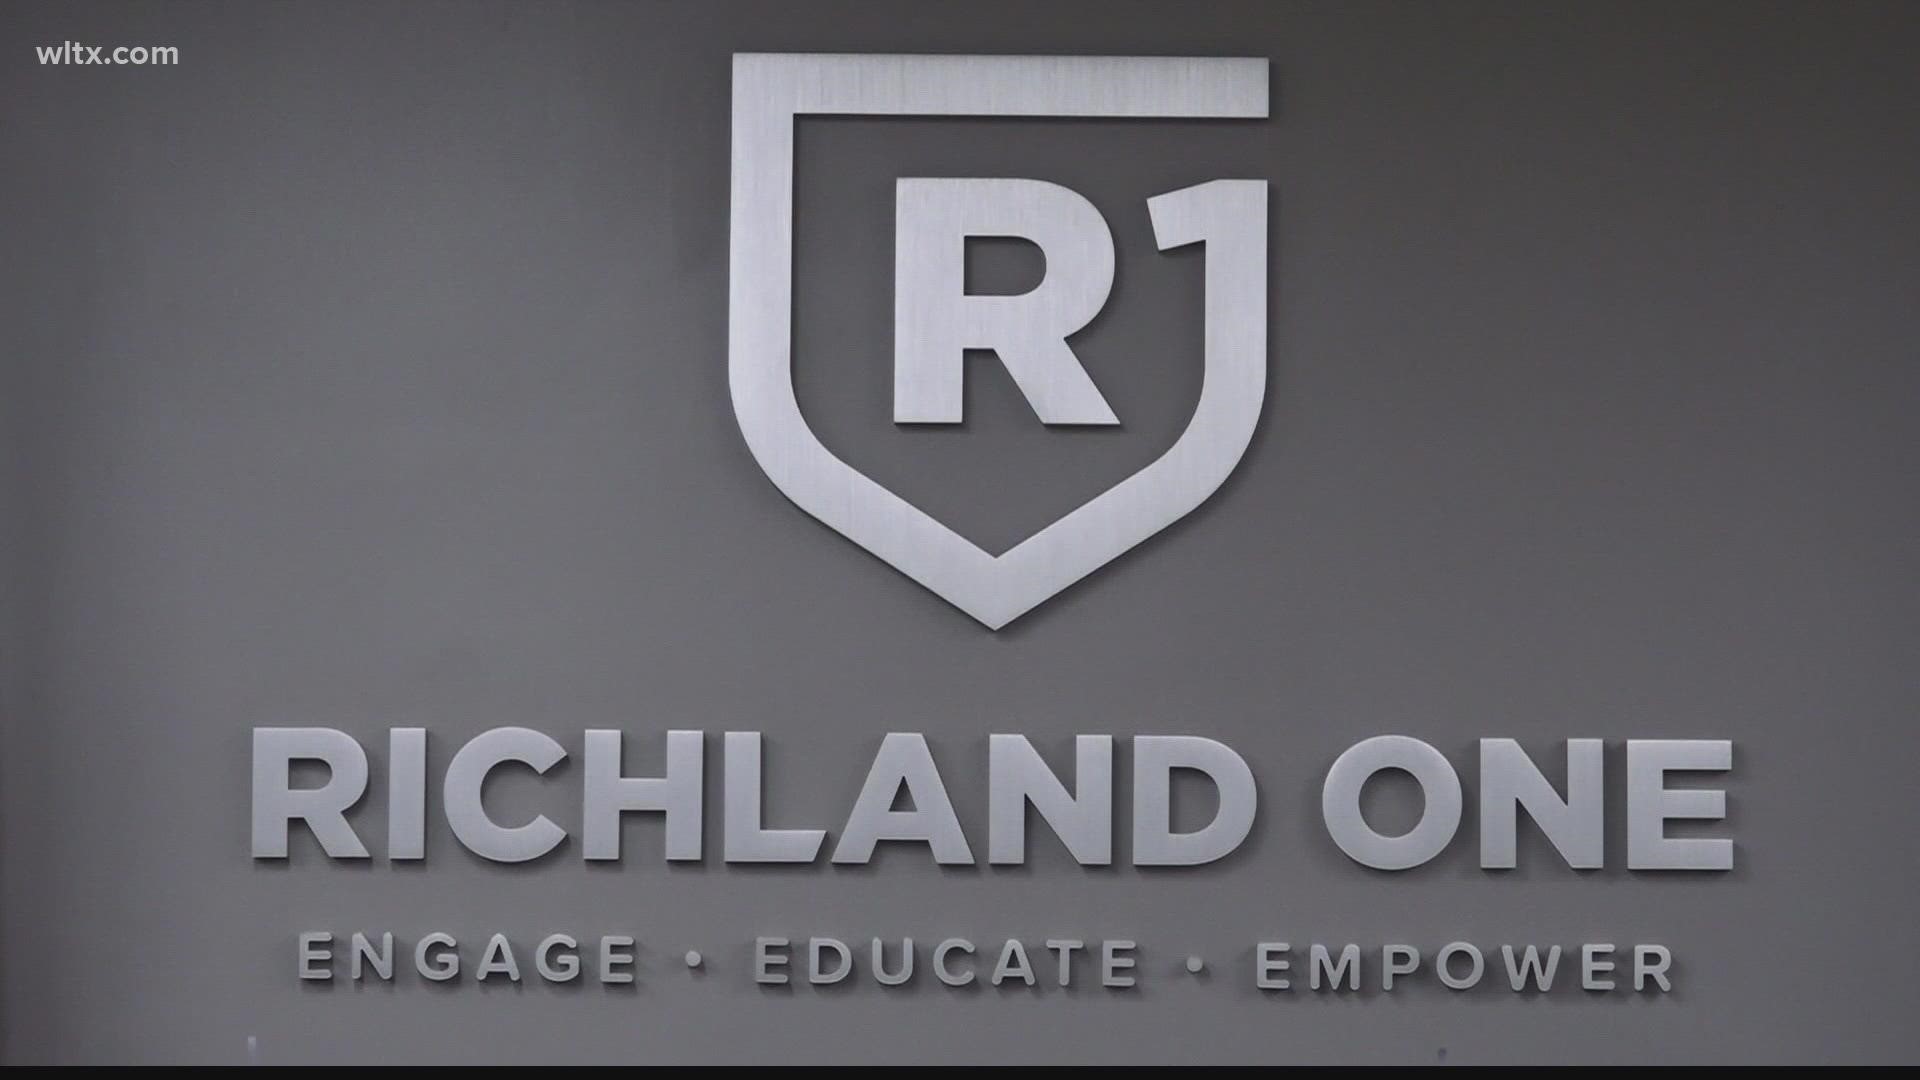 A South Carolina grand jury has indicted a former Richland One official, Travis Antonio Braddy, on charges that he embezzled school funds for his own personal use.